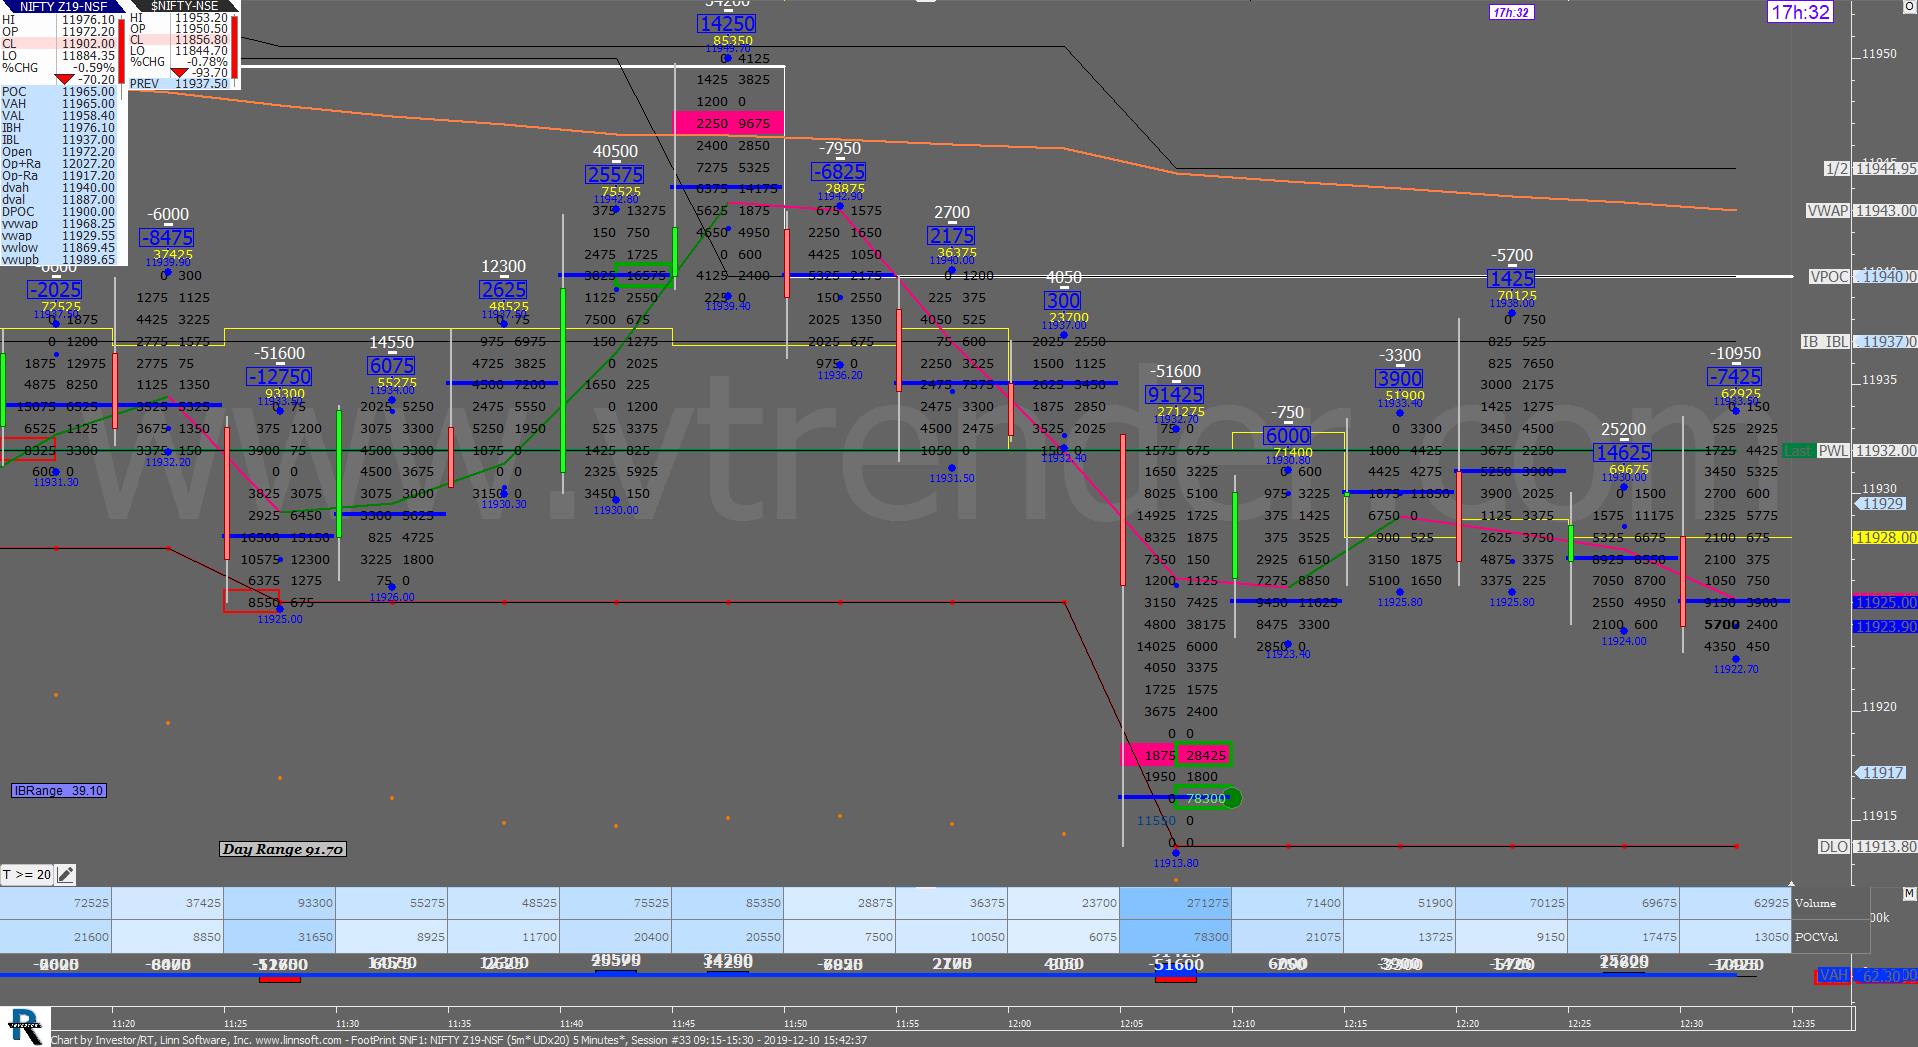 3 12 Order Flow Charts Dated 10Th Dec (5 Mins) Banknifty Futures, Day Trading, Intraday Trading, Intraday Trading Strategies, Nifty Futures, Order Flow Analysis, Support And Resistance, Trading Strategies, Volume Profile Trading